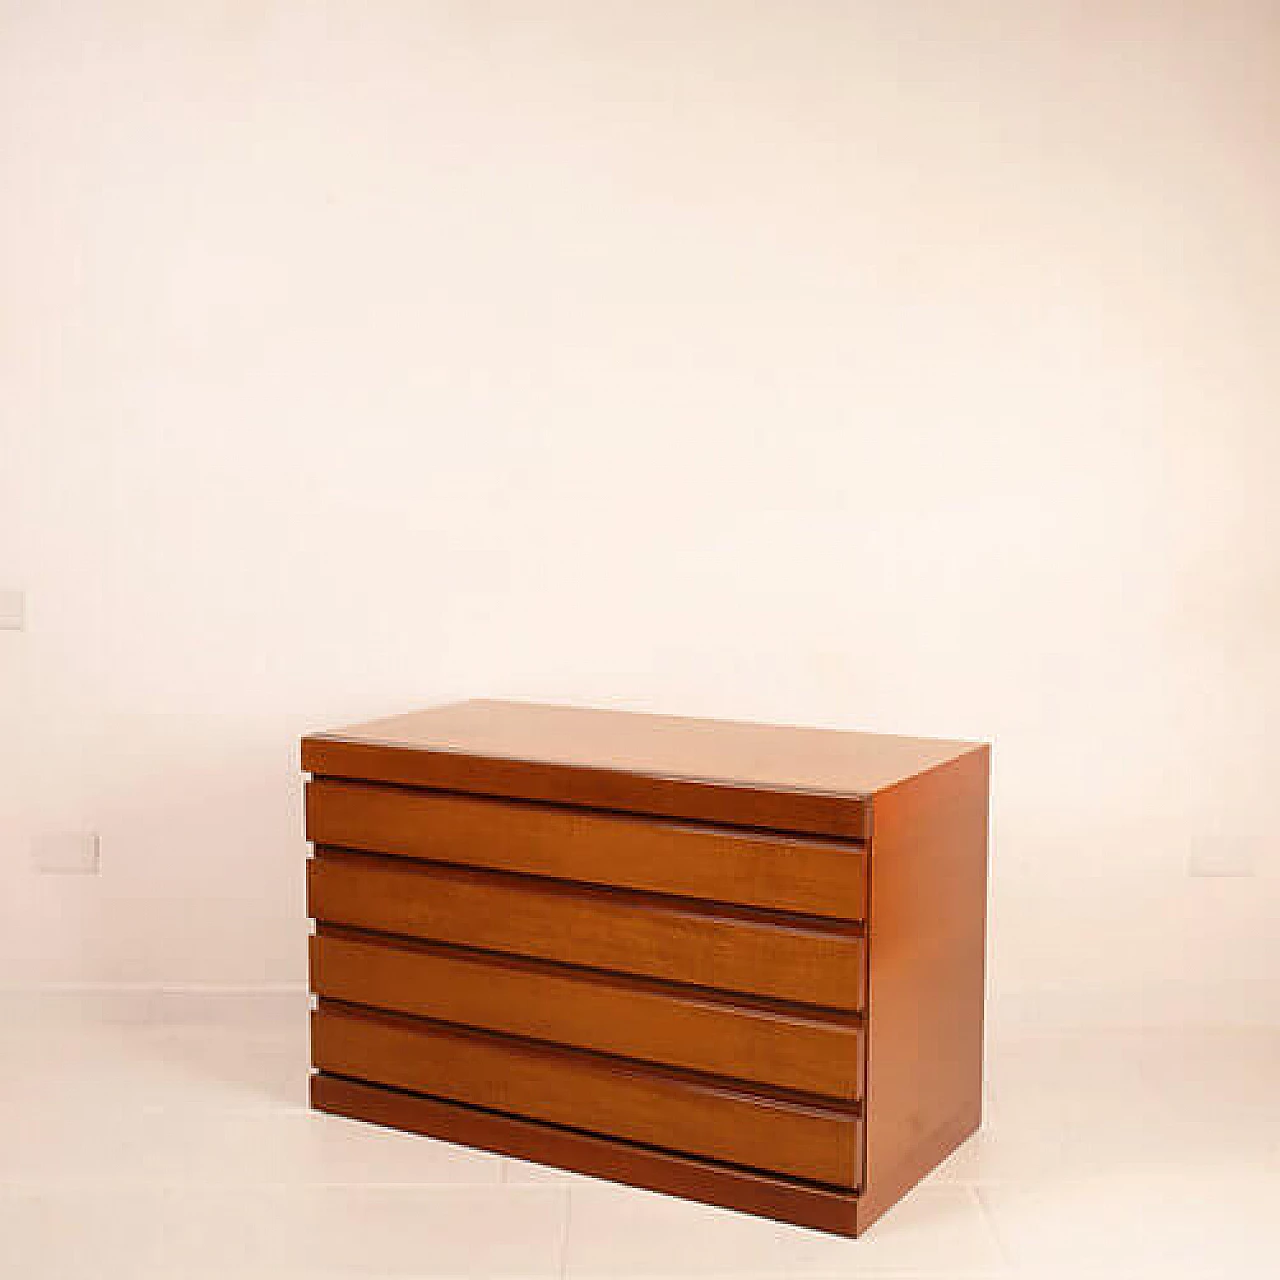 Programma S11 chest of drawers in walnut by Angelo Mangiarotti for Sorgente dei Mobili, 1970s 5